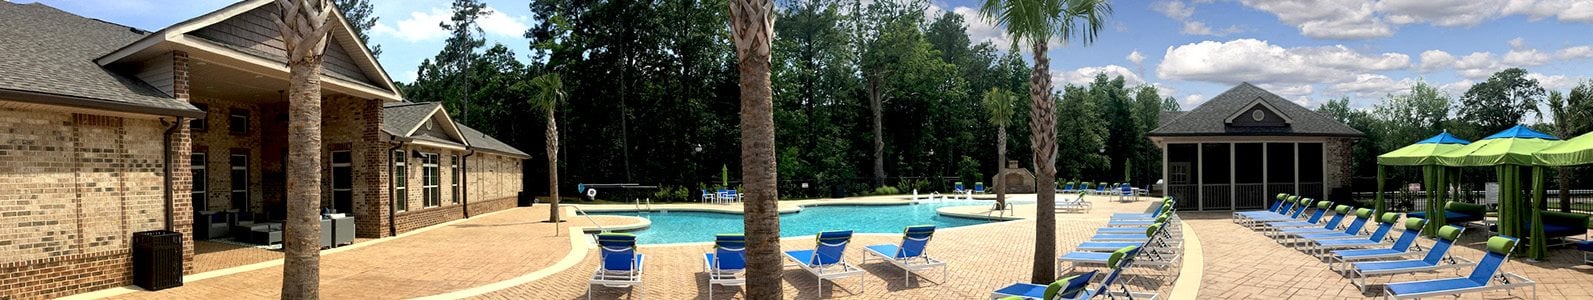 Sparkling Pool at Bacarra Apartments, Raleigh, NC, 27606